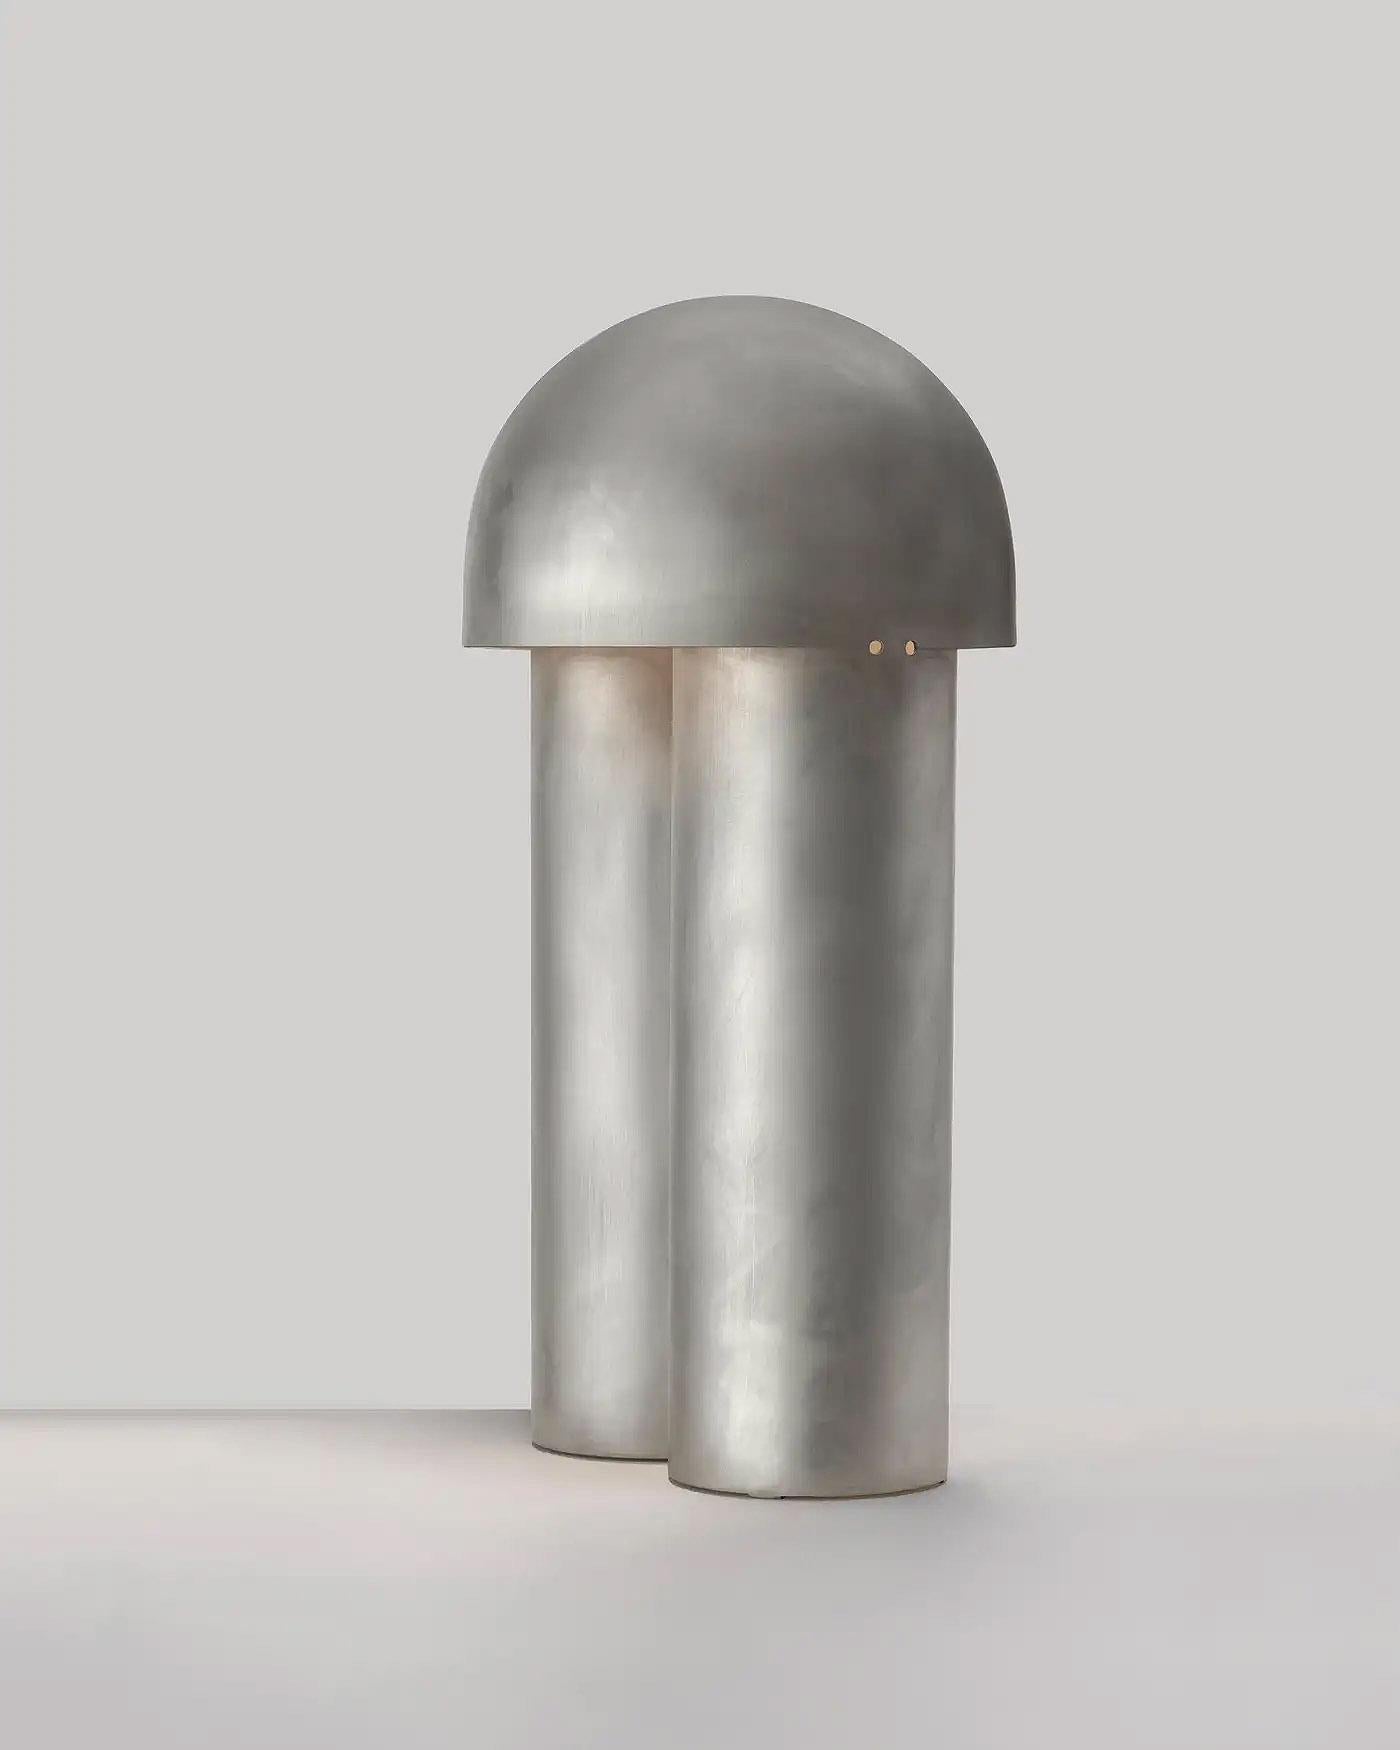 Contemporary Silvered Brass Sculpted Table Lamp, Monolith Small by Paul Matter

The Monolith lamp is an exercise in reduction. Sculpted out of a single body with the help of simple scores and folds, the lamps geometry, surface texture and finish of